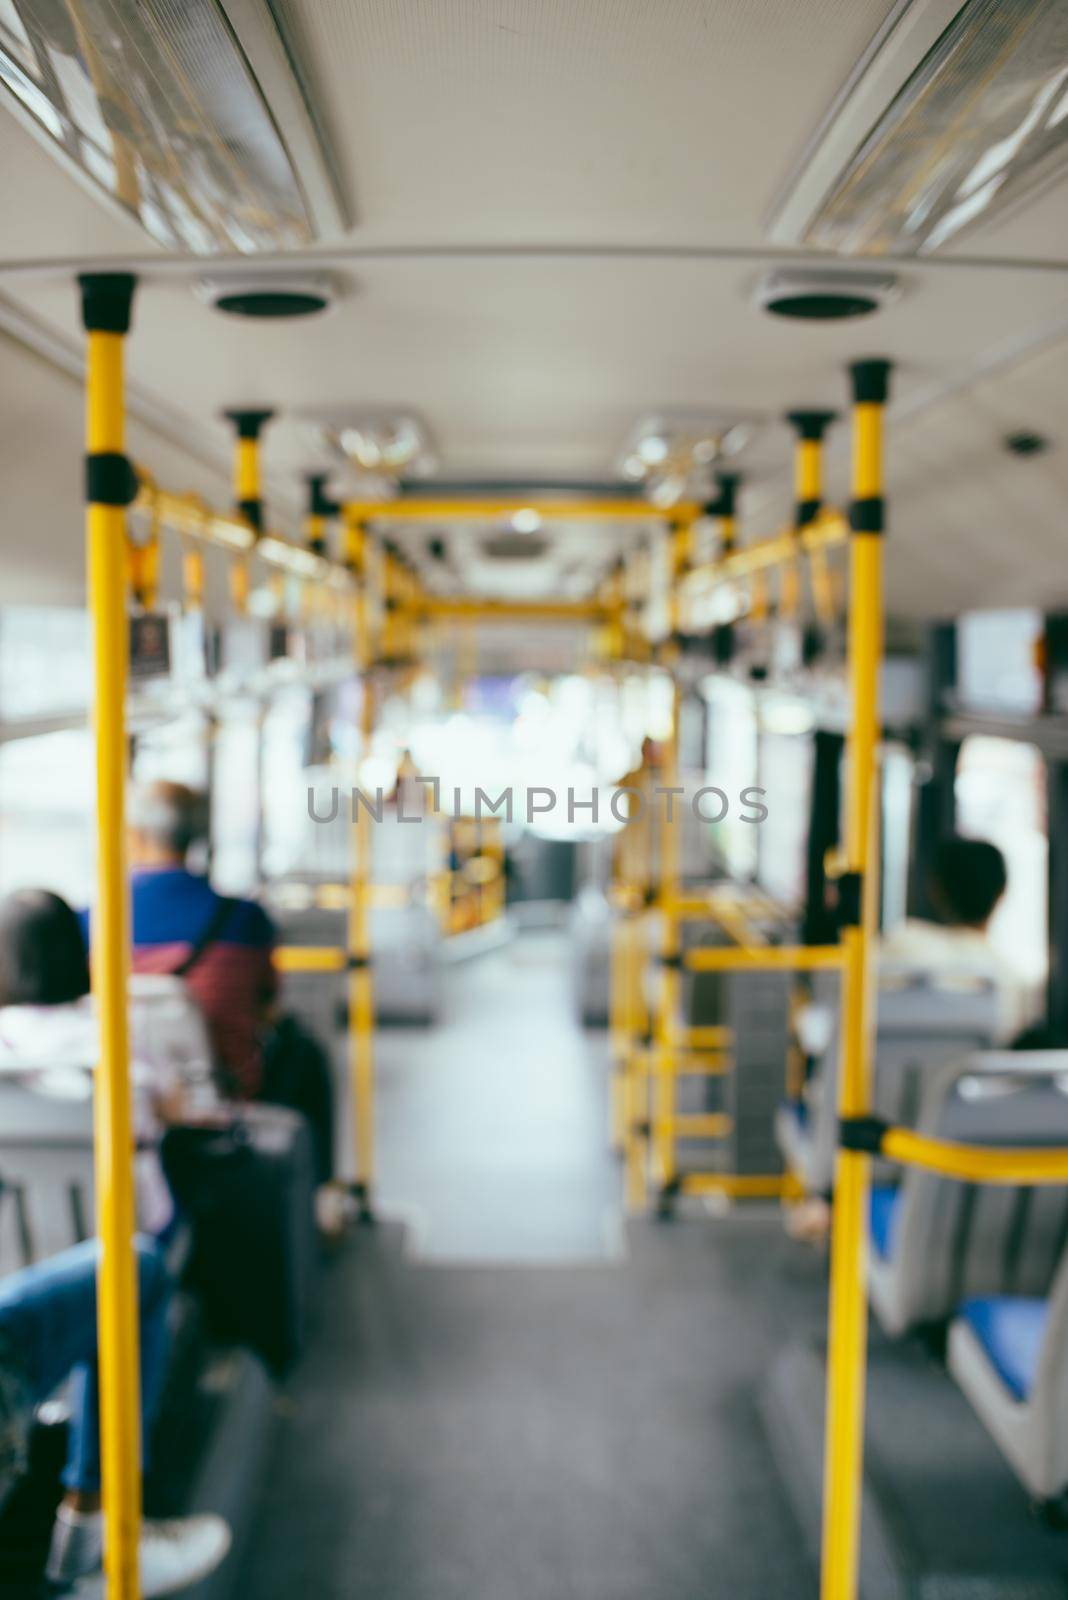 Public transportation. Blur image of interior of modern city bus by makidotvn